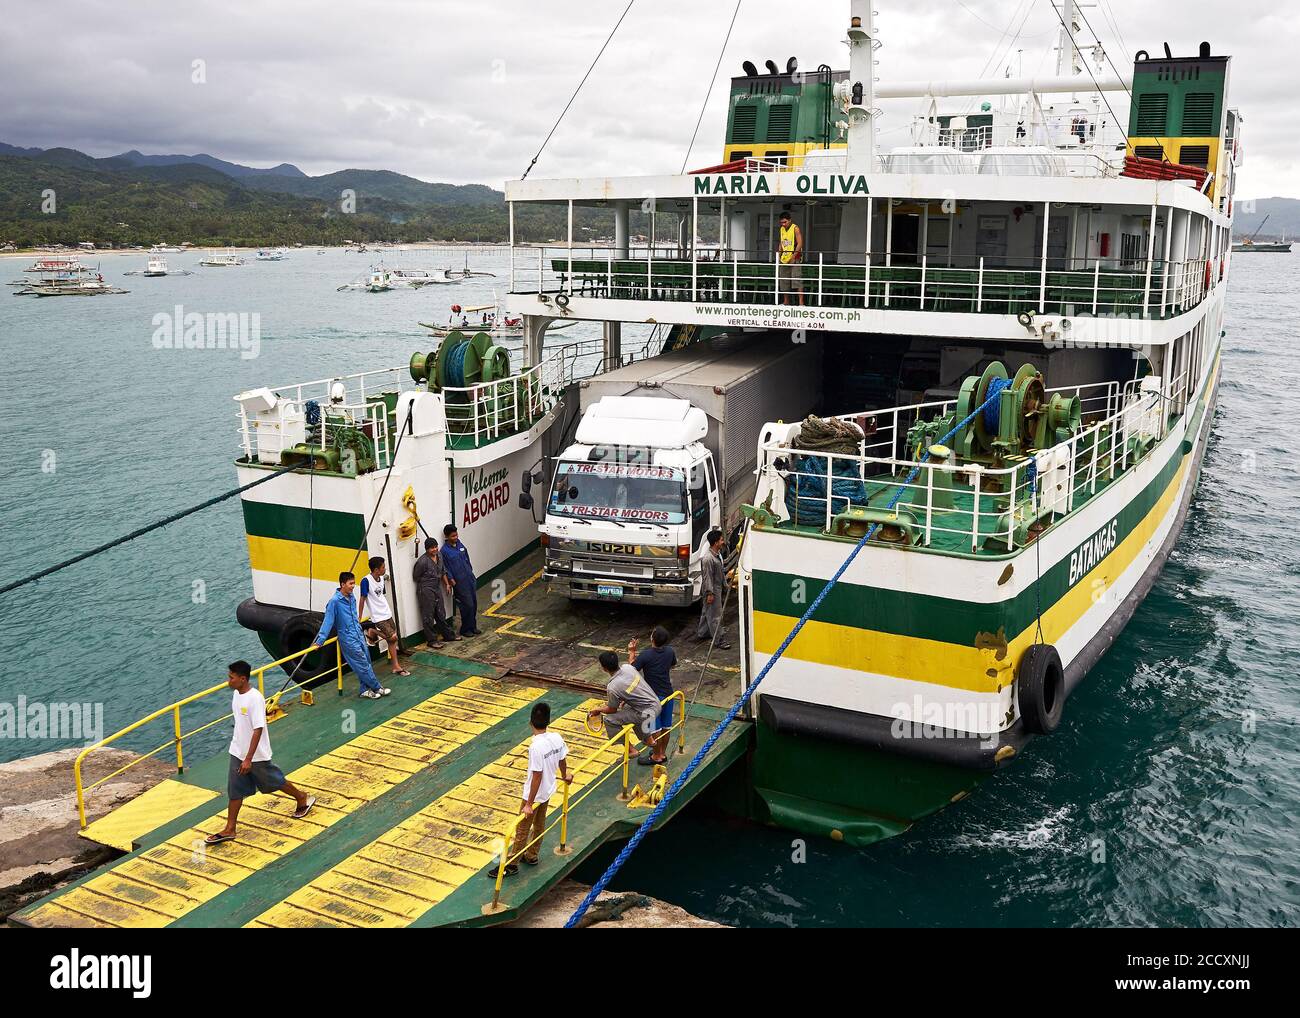 Caticlan pier, Aklan, Philippines: An inter-island vessel of Montenegro shipping lines docking at the harbor, trucks disembarking Stock Photo